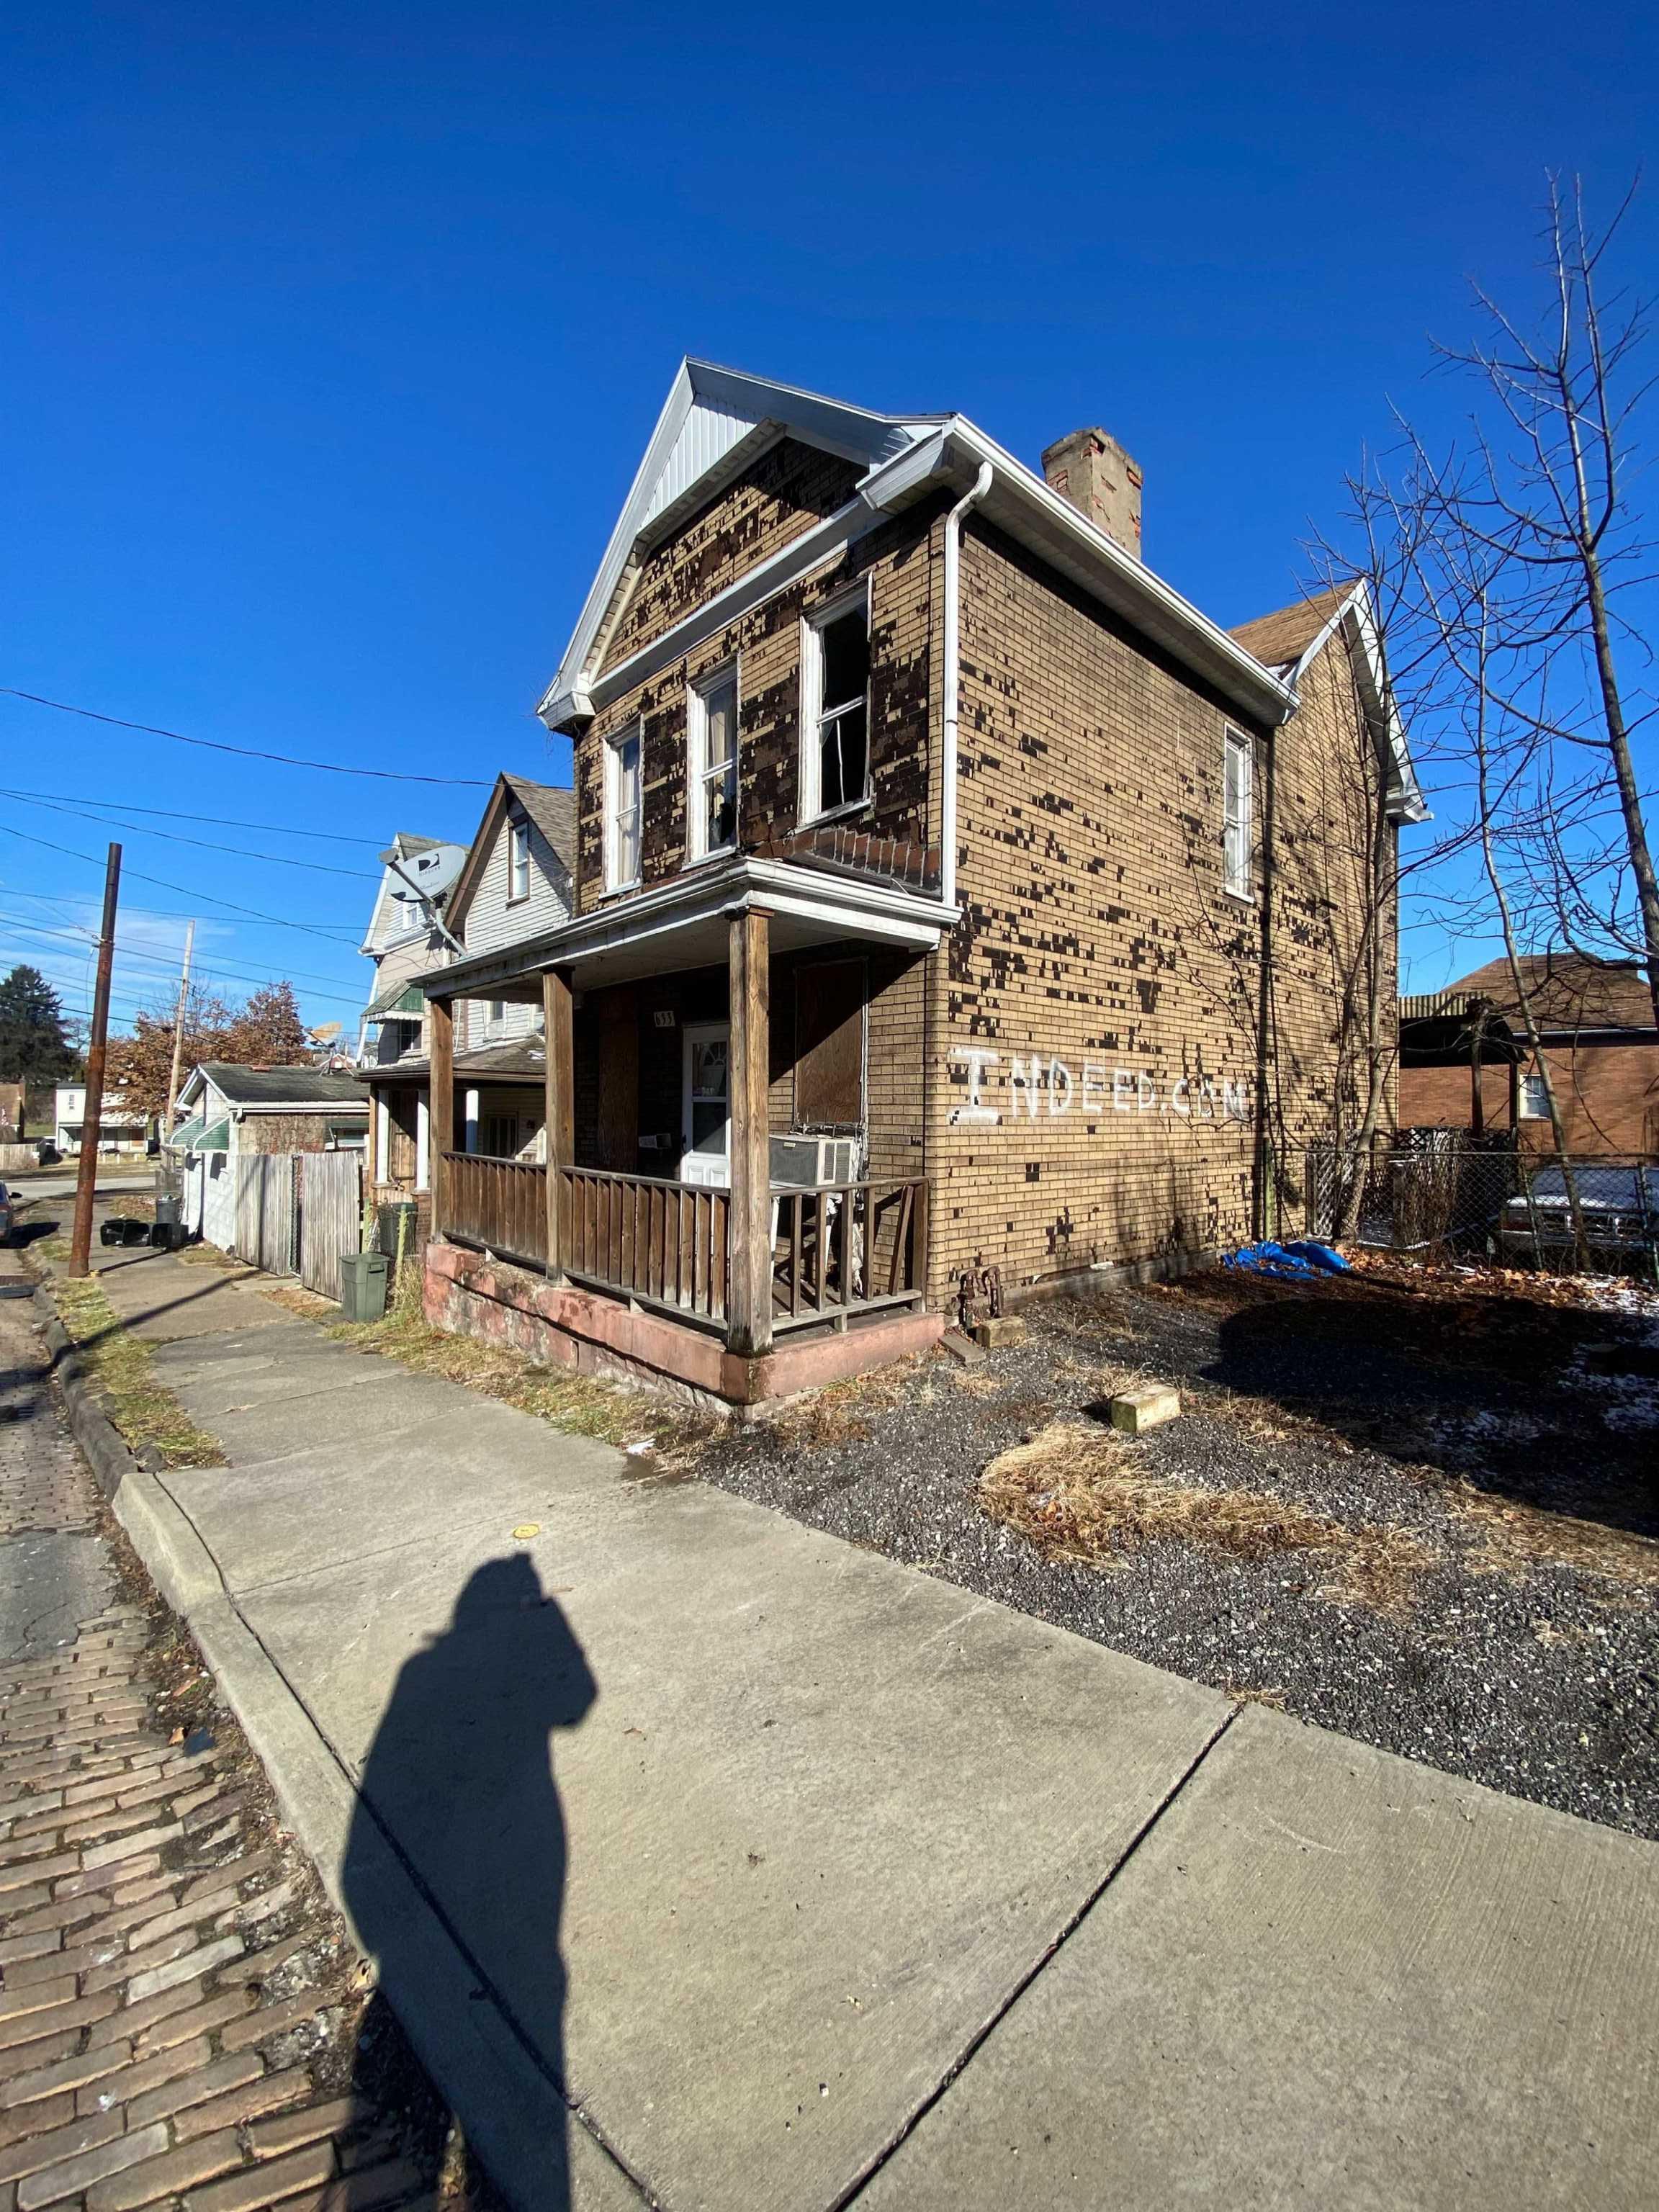 633 Catherine St<br />Duquesne, PA